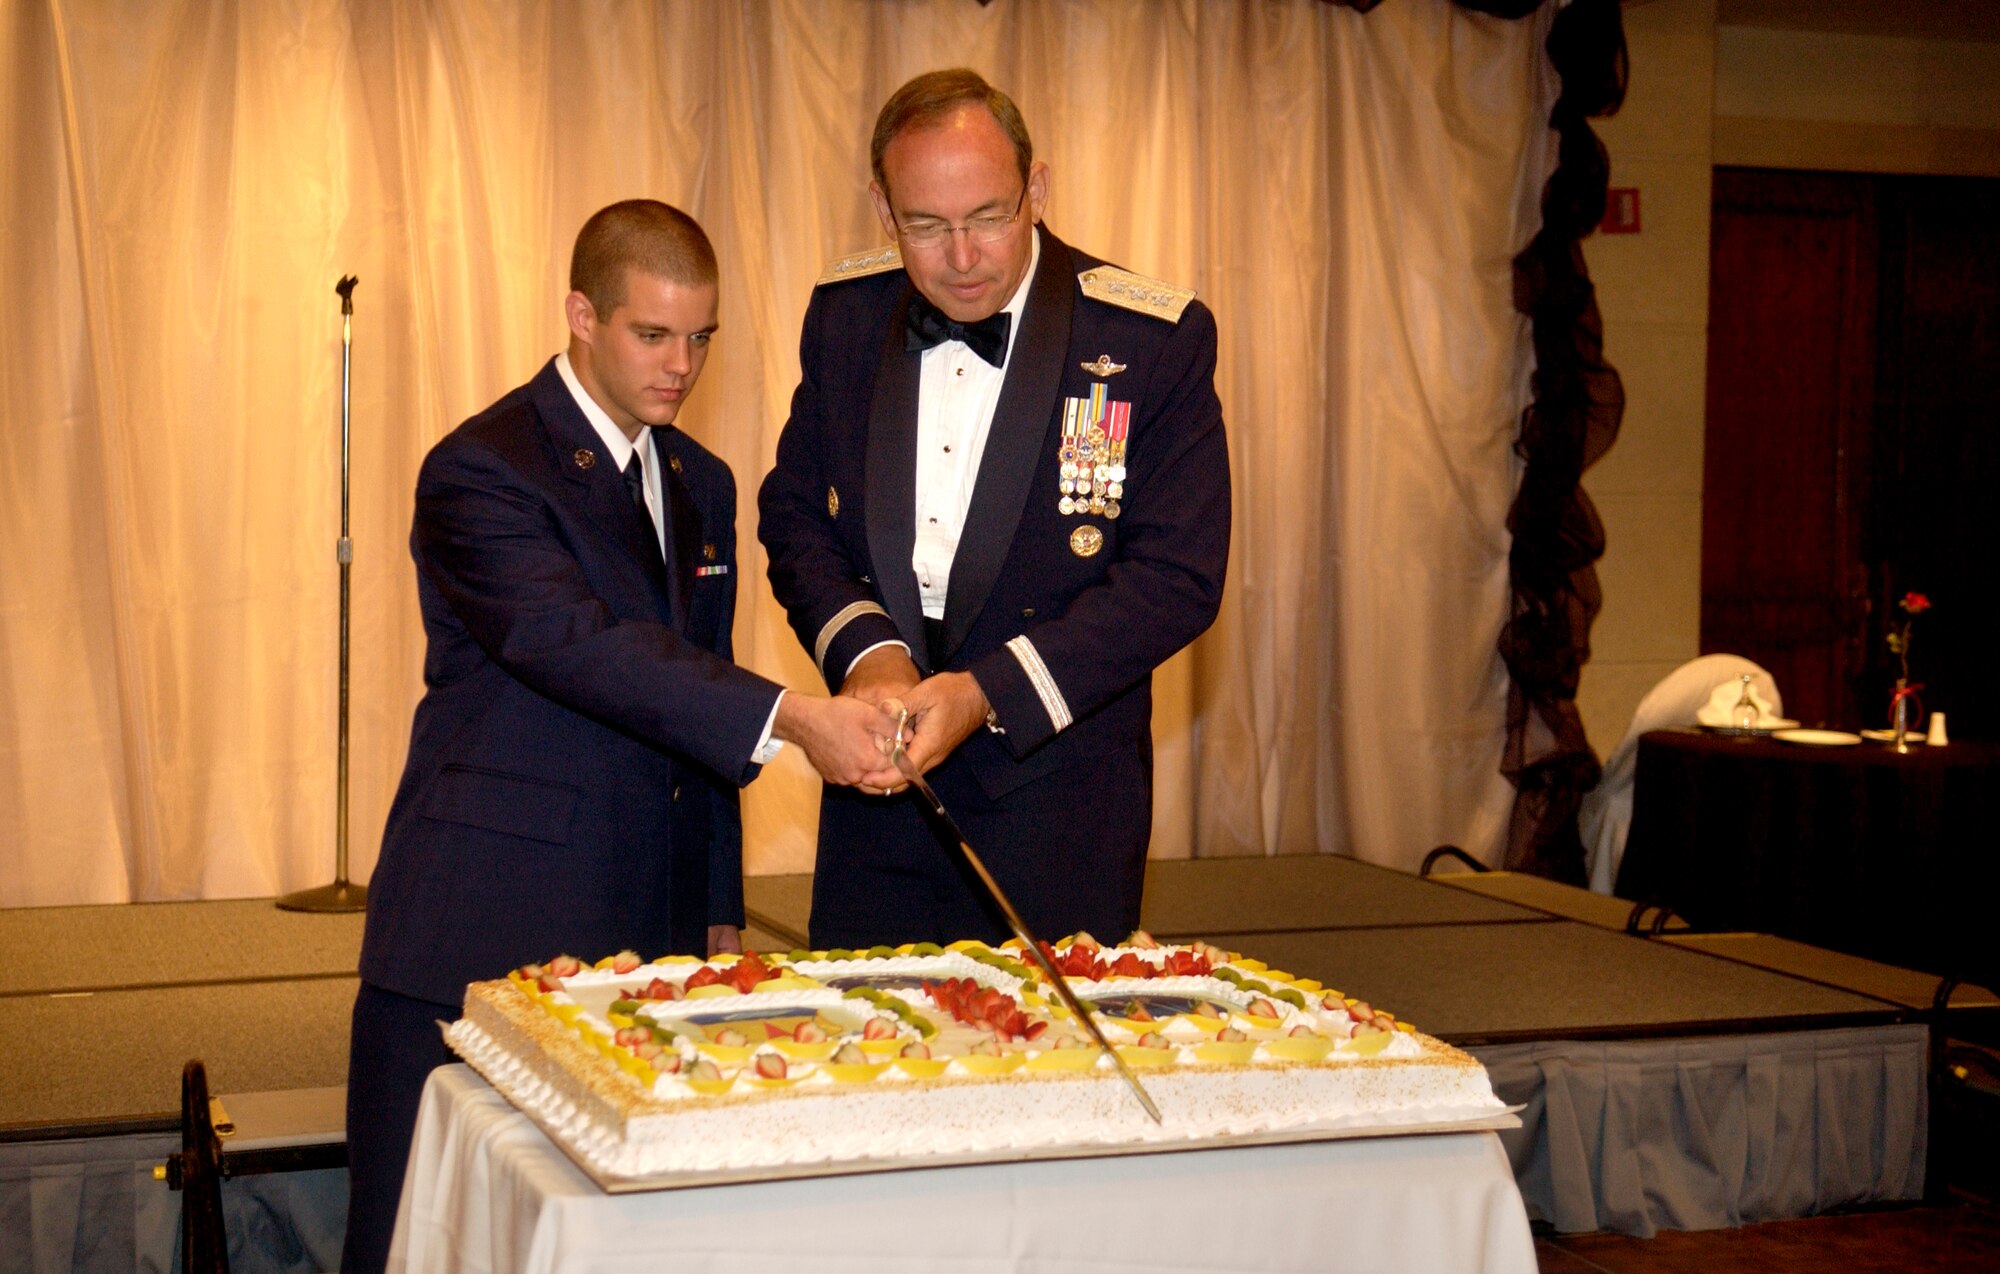 ANDERSEN AFB, GUAM -- Guest speaker, Lt. Gen. David Deptula, U.S.A.F. Deputy Chief of Staff for Intelligence, Surveillance and Reconnaissance, cuts the cake with the lowest ranking Airman in the room during the Air Force 60th Birthday Ball at Hilton Guam Resort on Sept. 8, 2007.  The ball was the final event of the Guam's Air Force Week. Air Force Week's purpose was to raise public awareness of the service's operations and capabilities, showcase its Airmen, and thank local citizens for their heartfelt support of its men and women over the Air Force's 60-year history. 
 (U.S. Air Force photo by Senior Airman Miranda Moorer/36th Wing Public Affairs )                                   